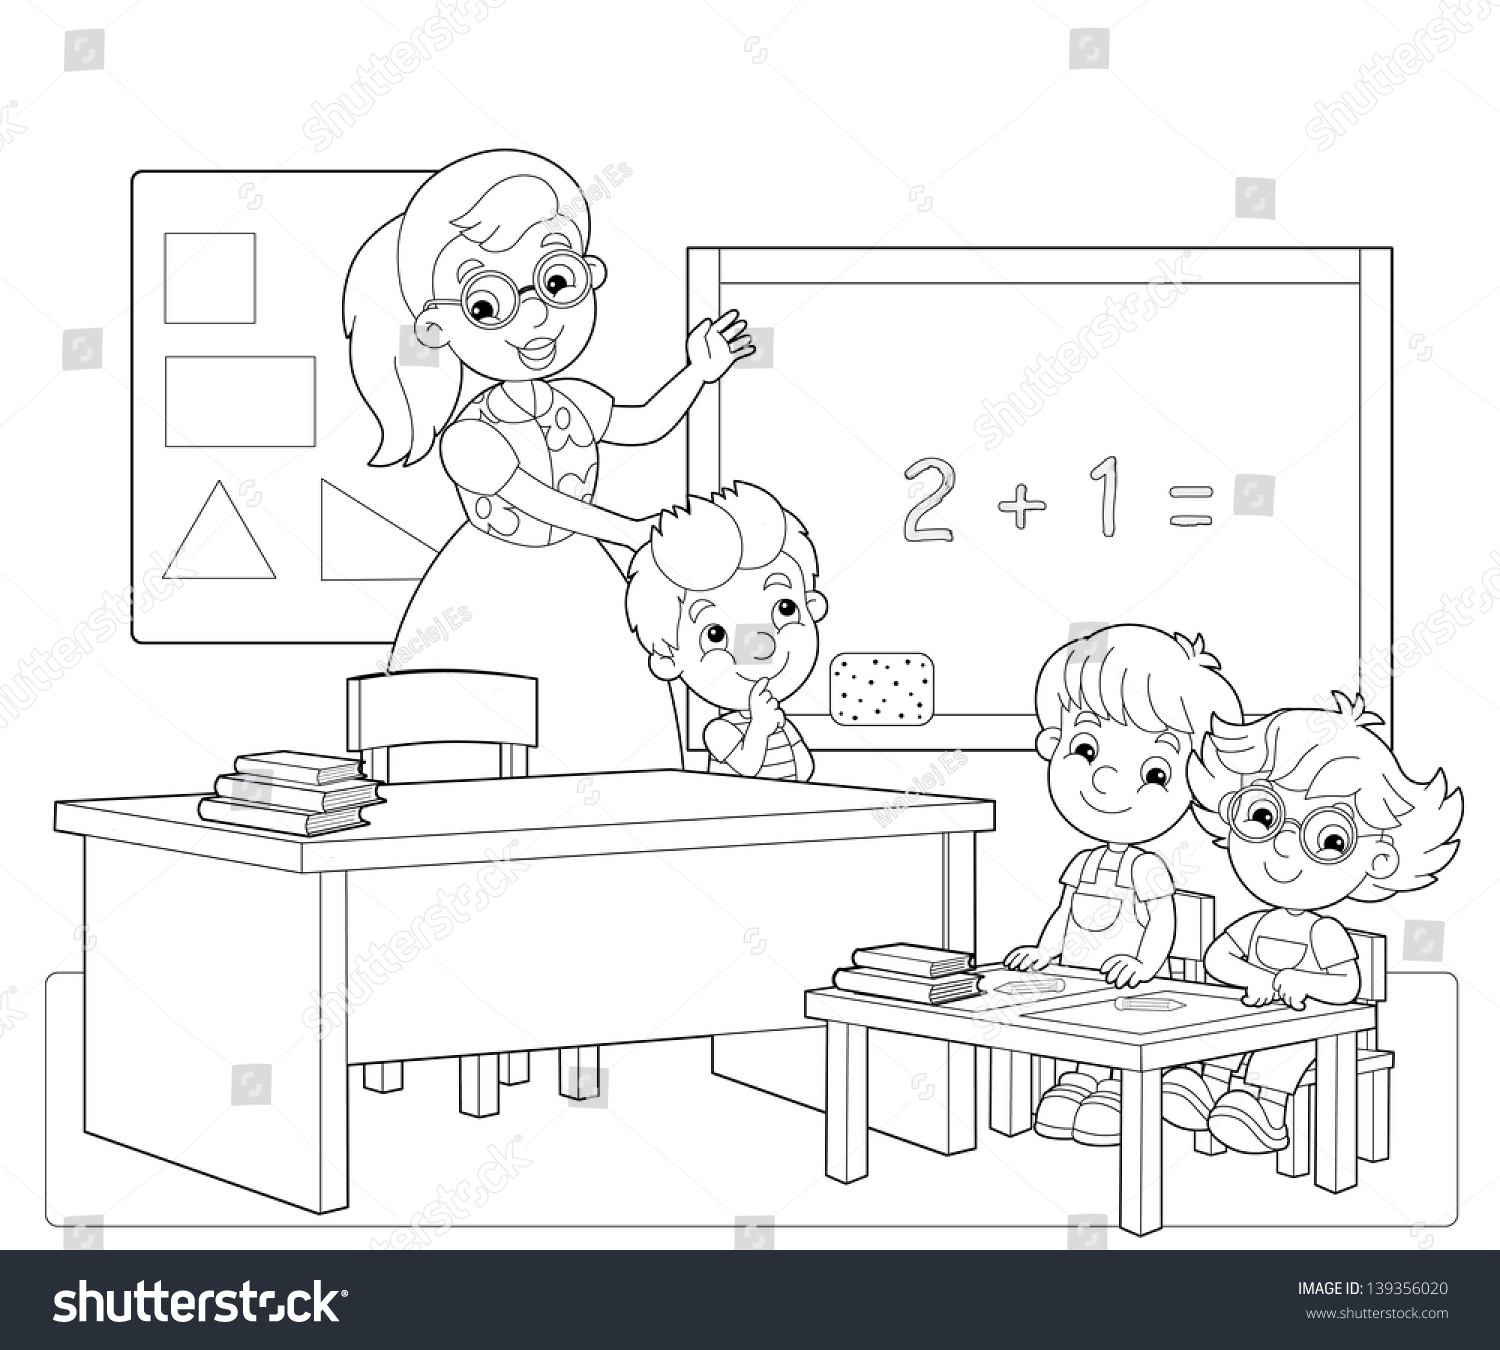 57 Coloring Pages Of Classroom  Latest Free